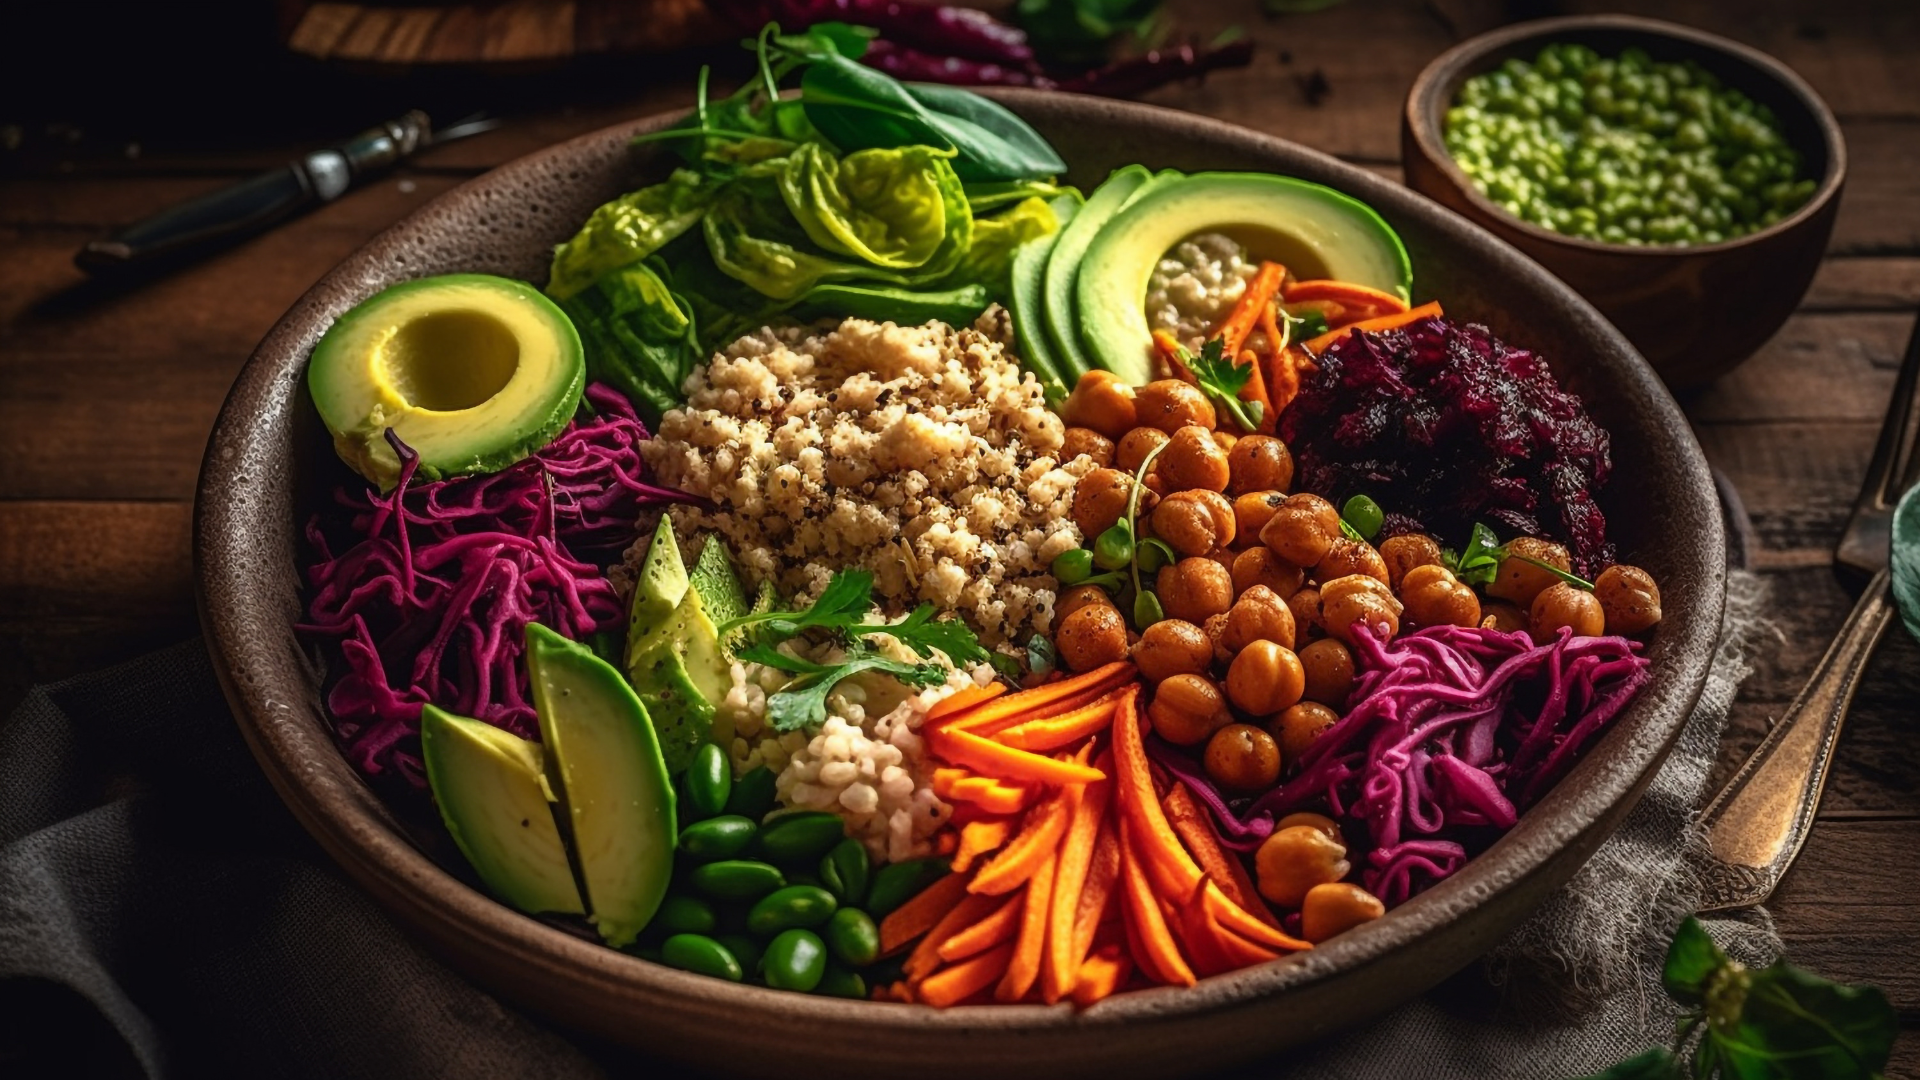 Plant-based Food: The future is sprouting! Rise in demand for plant-based food in F&B sector